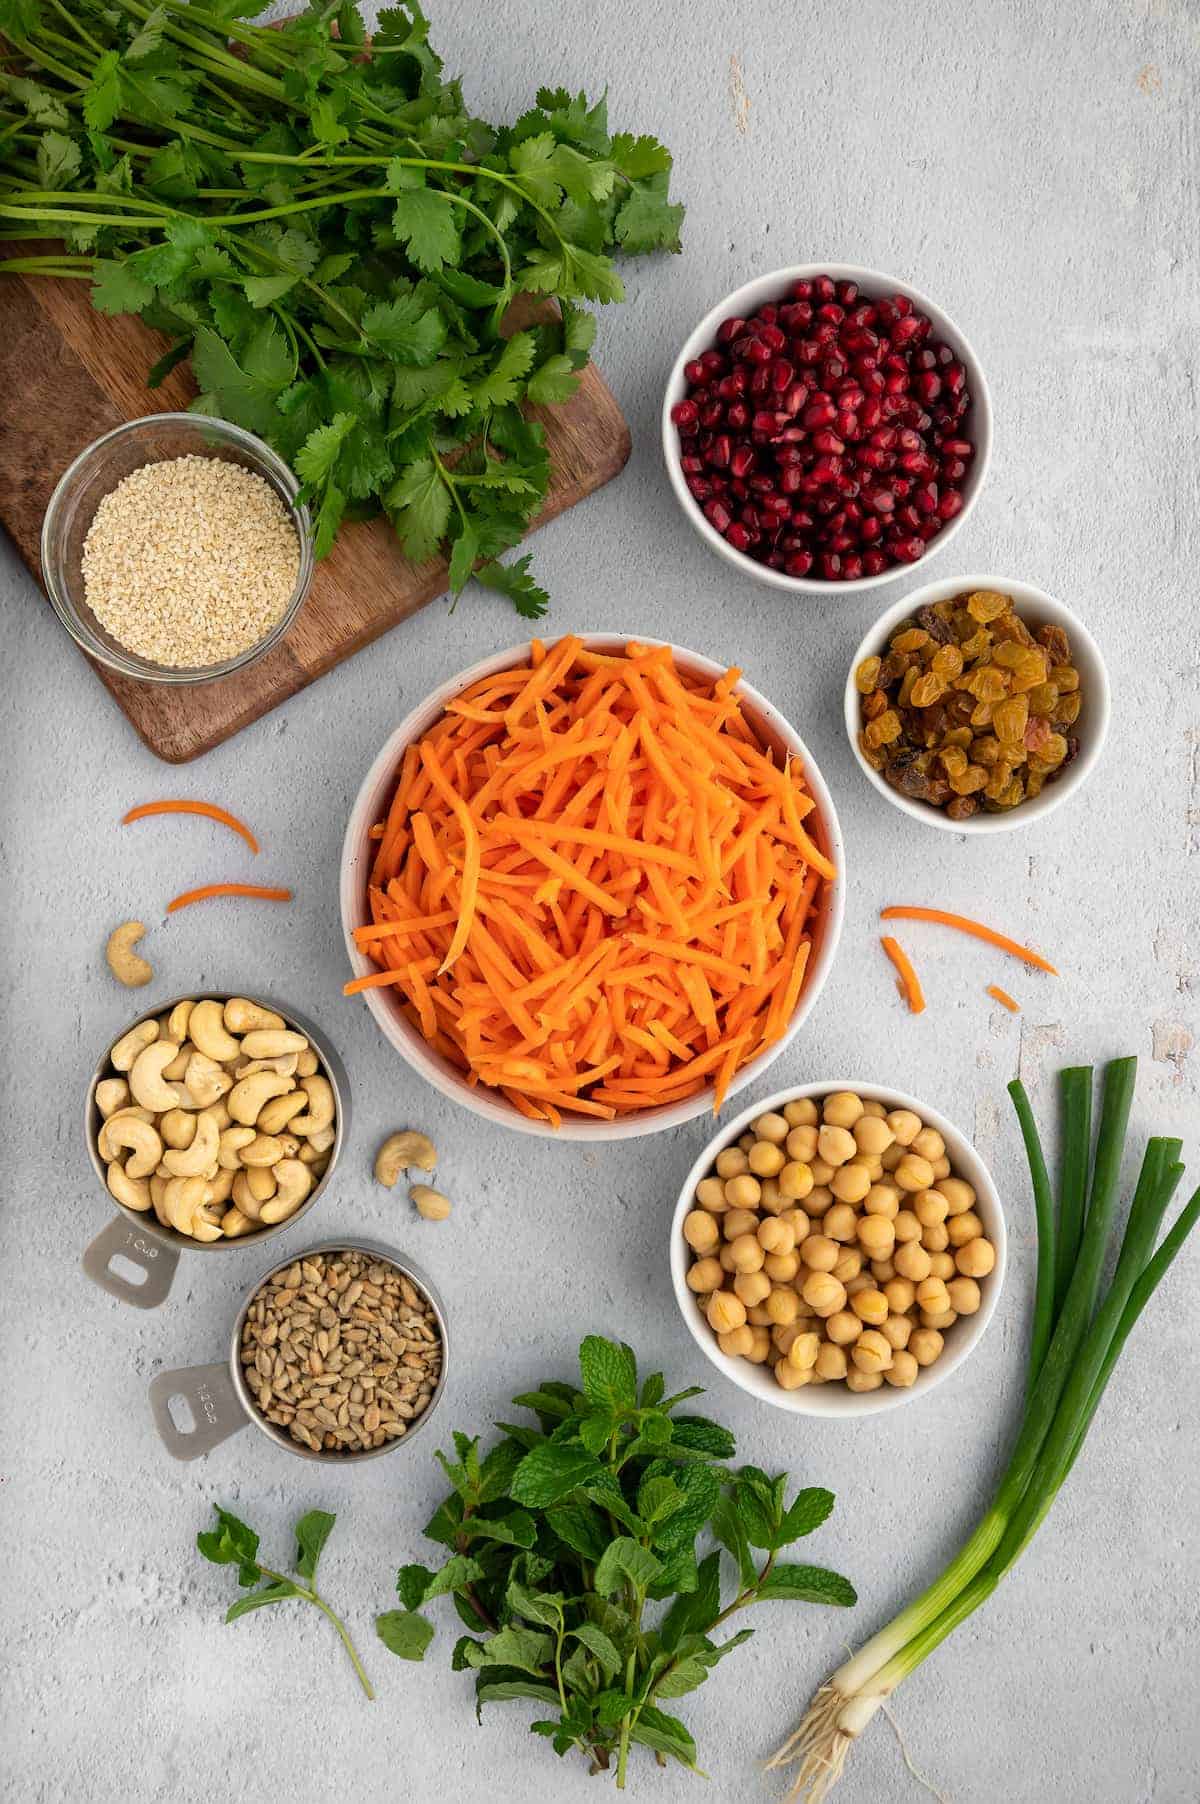 Key ingredients for a Moroccan carrot salad.